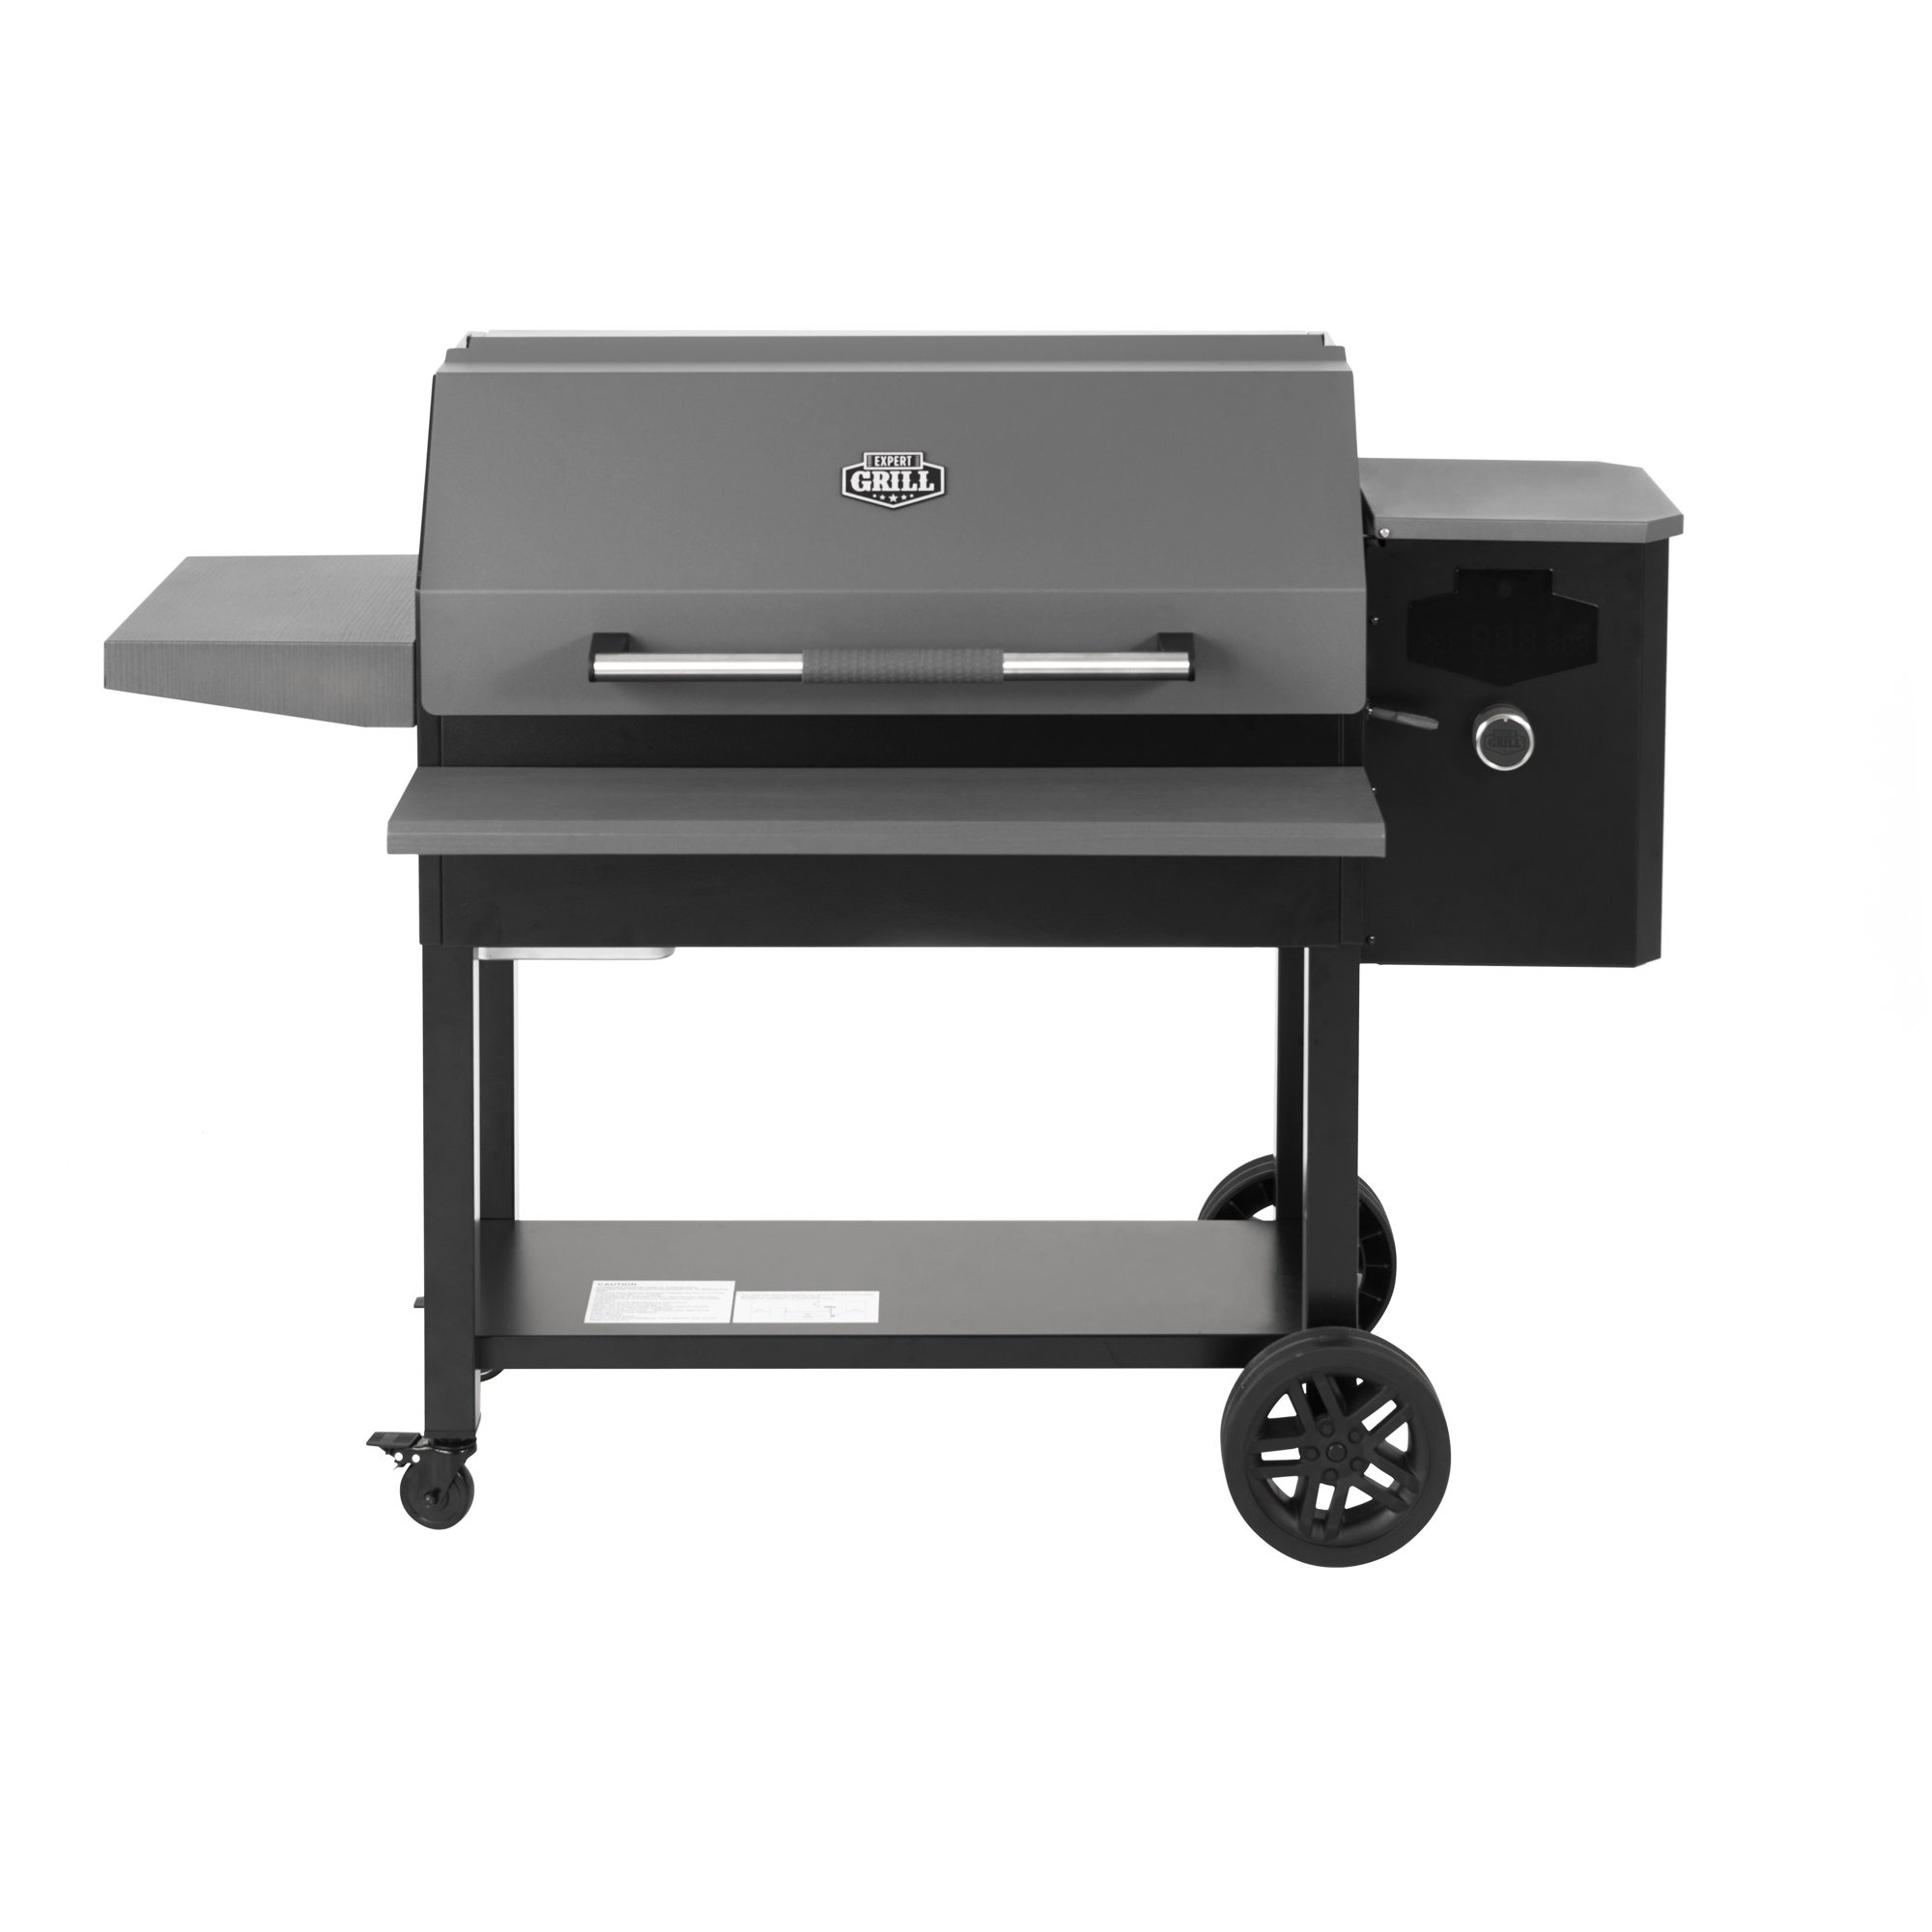 Expert Grill Atlas Pellet Grill and Smoker - Walmart.com $197 In Store Pick Up or FS